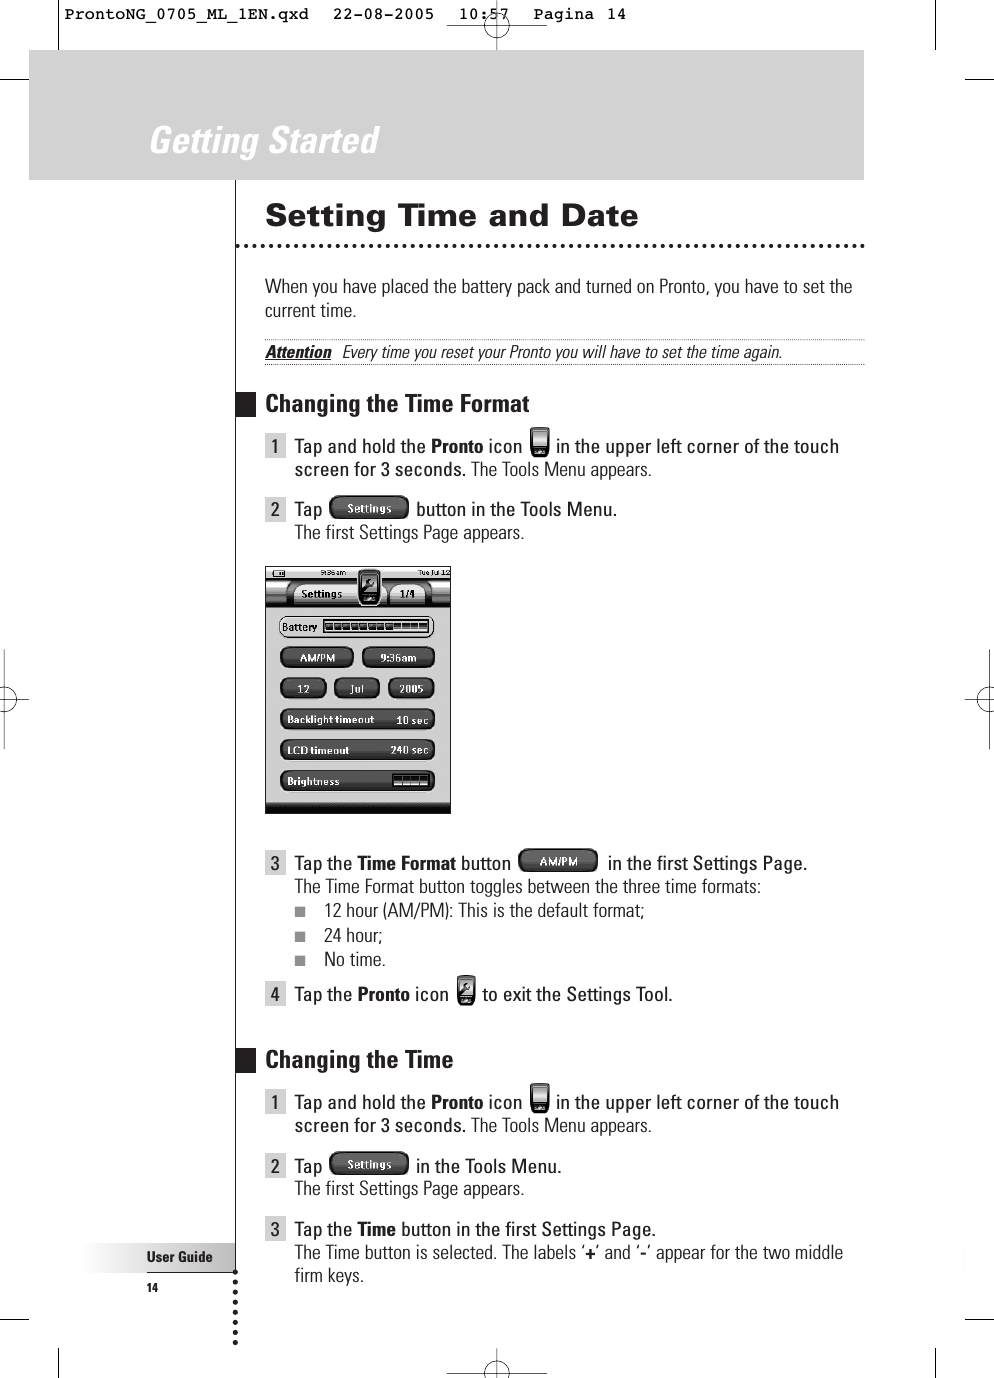 User Guide14Getting StartedSetting Time and DateWhen you have placed the battery pack and turned on Pronto, you have to set thecurrent time.Attention Every time you reset your Pronto you will have to set the time again.Changing the Time Format1Tap and hold the Pronto icon  in the upper left corner of the touchscreen for 3 seconds. The Tools Menu appears.2Tap  button in the Tools Menu.The first Settings Page appears.3Tap the Time Format button  in the first Settings Page. The Time Format button toggles between the three time formats:■12 hour (AM/PM): This is the default format;■24 hour;■No time.4Tap the Pronto icon  to exit the Settings Tool.Changing the Time1Tap and hold the Pronto icon  in the upper left corner of the touchscreen for 3 seconds. The Tools Menu appears.2Tap  in the Tools Menu.The first Settings Page appears.3Tap the Time button in the first Settings Page.The Time button is selected. The labels ‘+’ and ‘-’ appear for the two middlefirm keys.ProntoNG_0705_ML_1EN.qxd  22-08-2005  10:57  Pagina 14